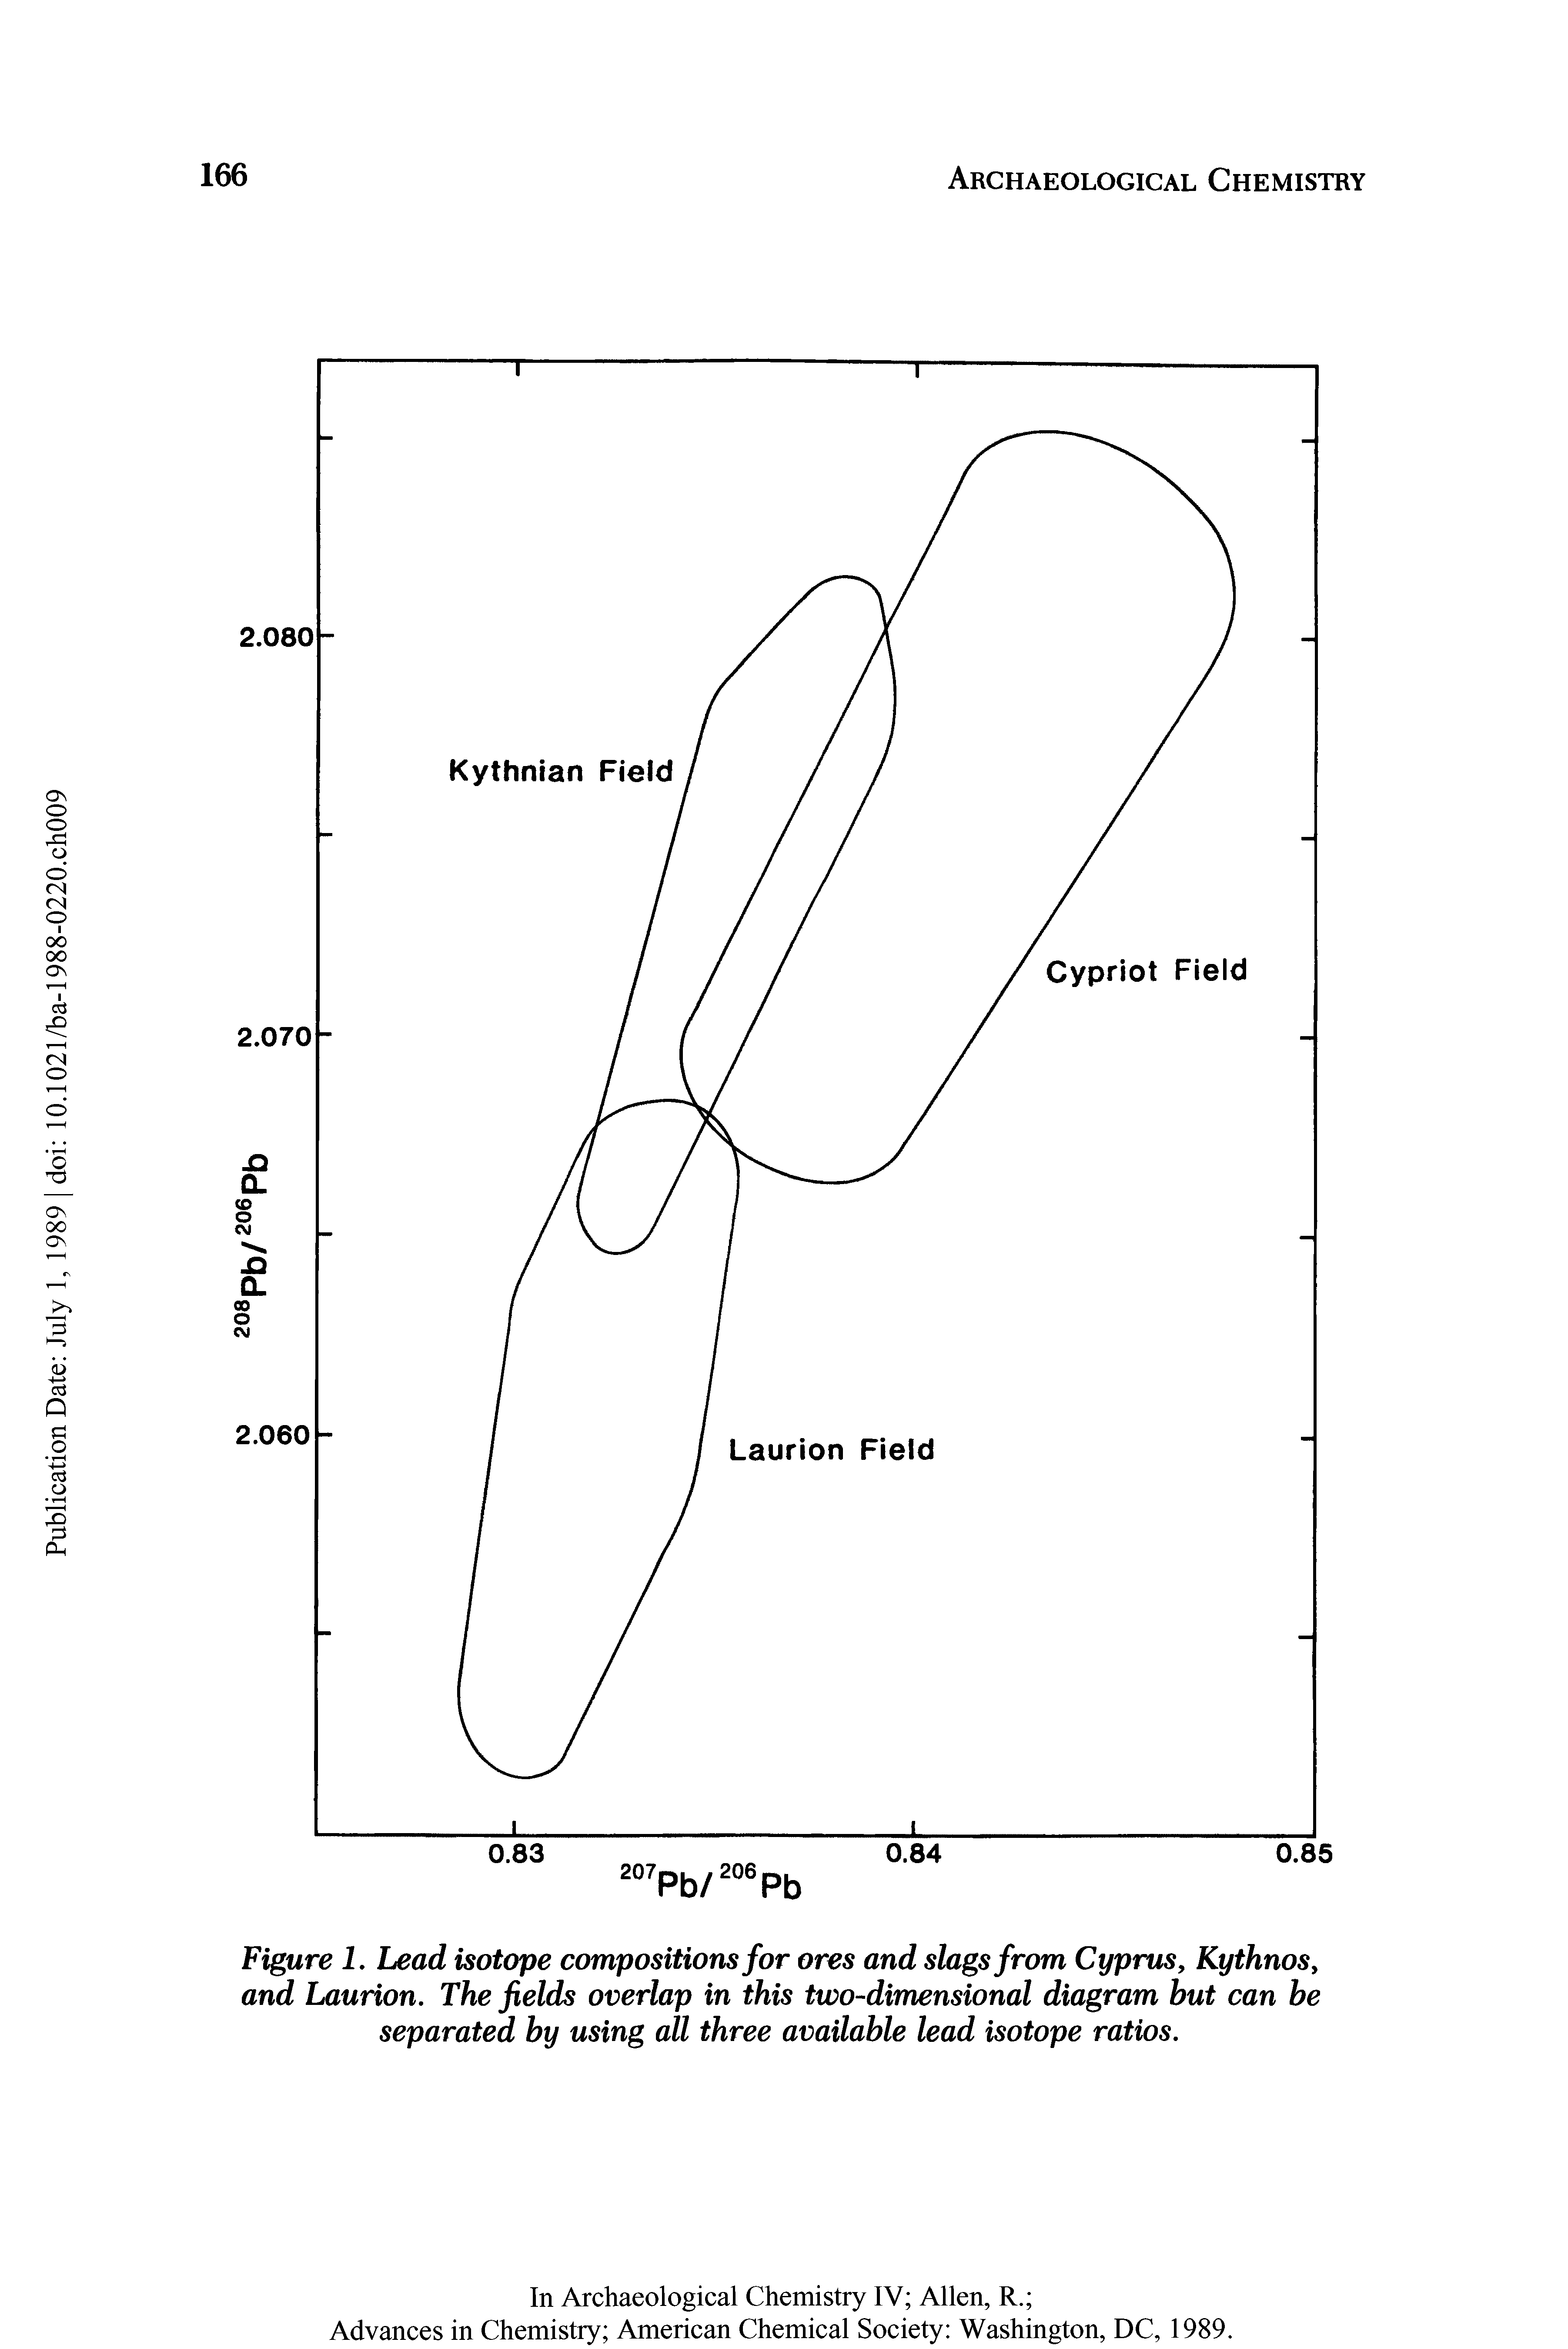 Figure 1. Lead isotope compositions for ores and slags from Cyprus, Kythnos, and Laurion. The fields overlap in this two-dimensional diagram but can be separated by using all three available lead isotope ratios.